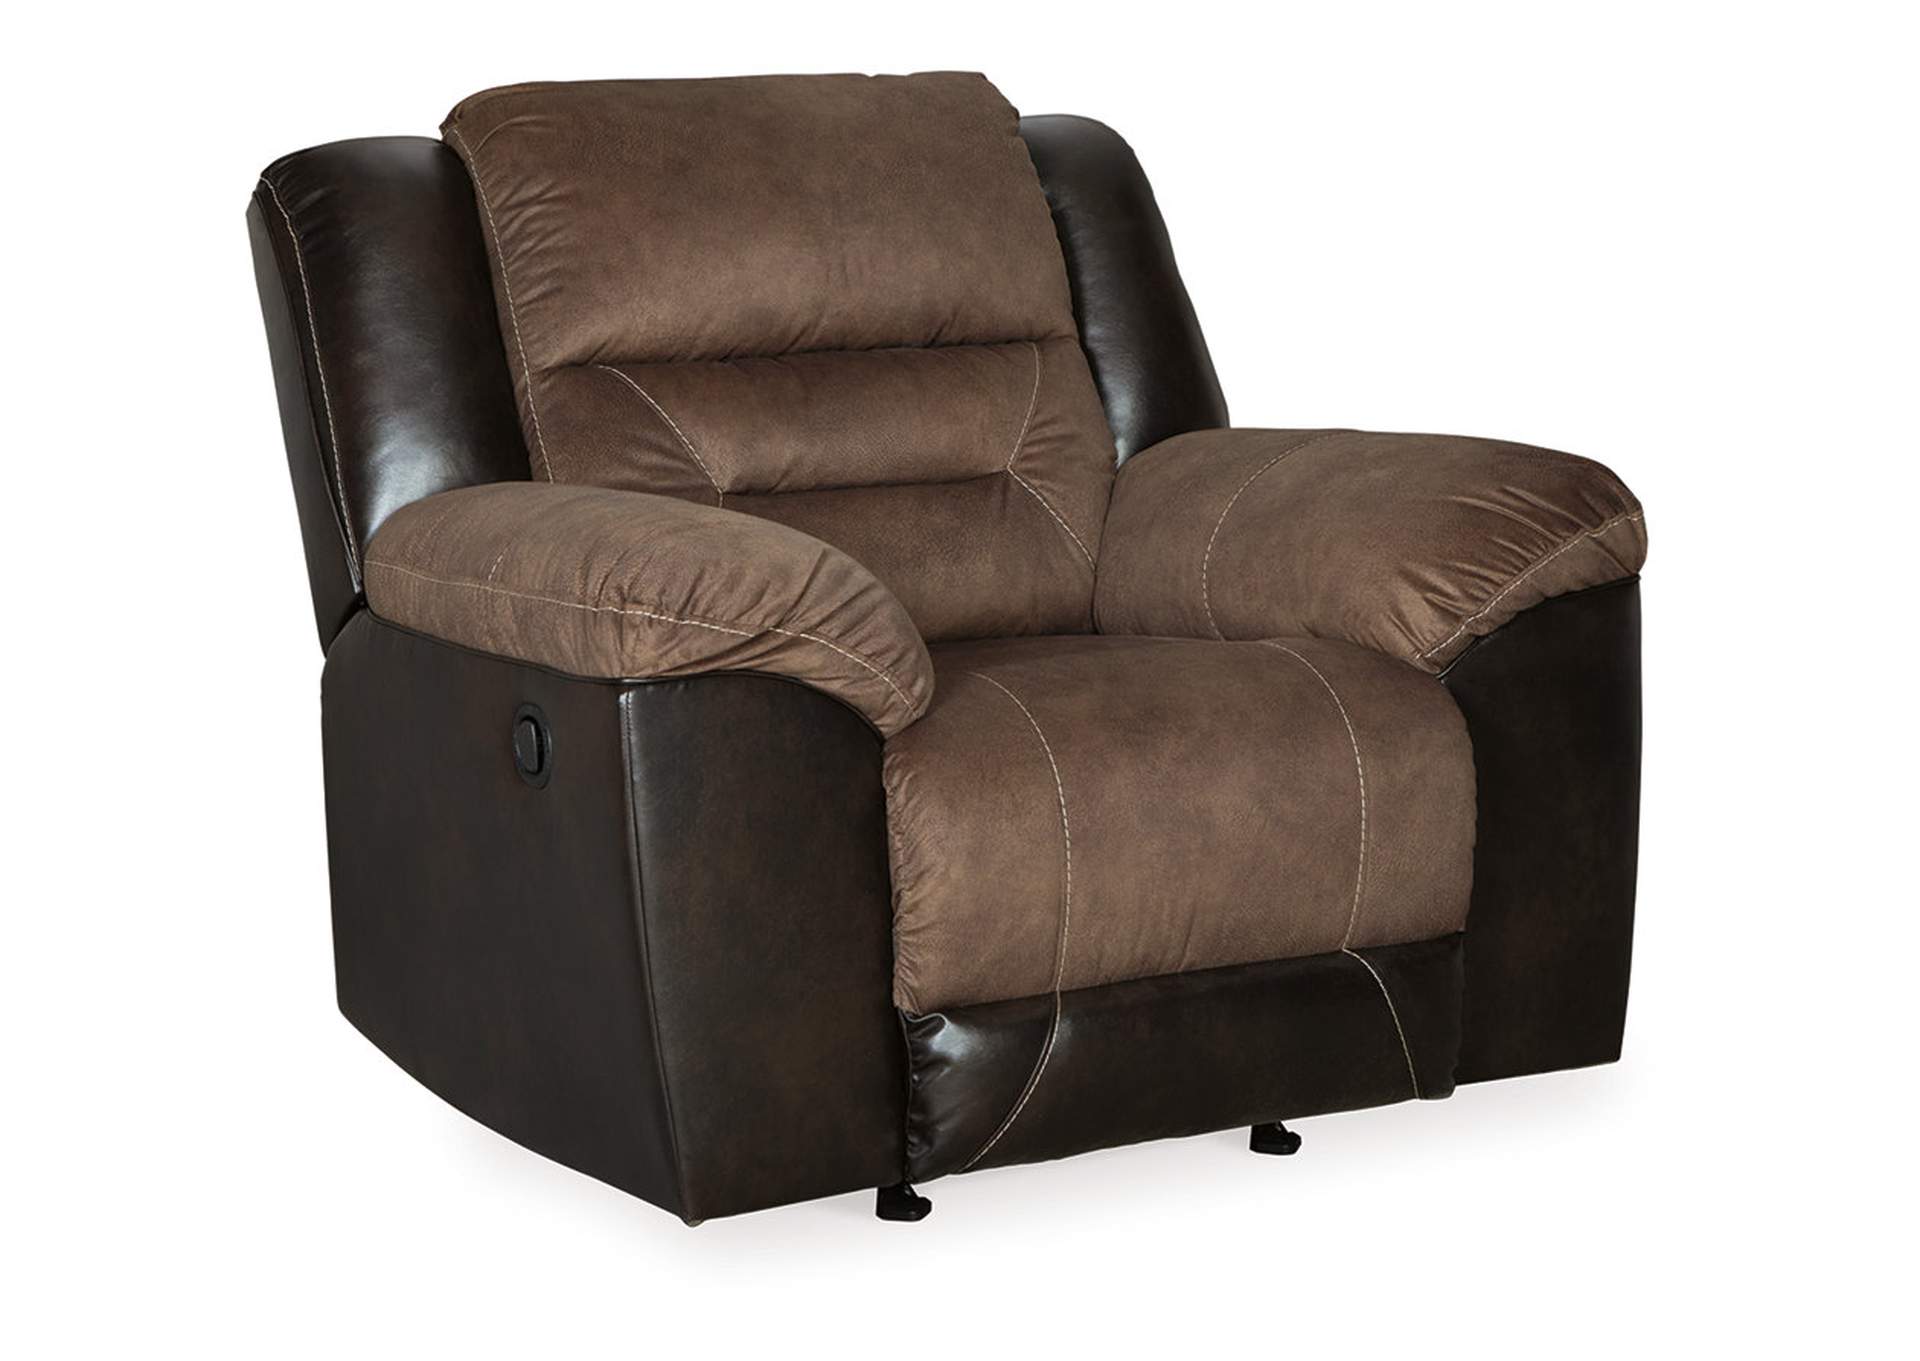 Earhart Sofa, Loveseat and Recliner,Signature Design By Ashley